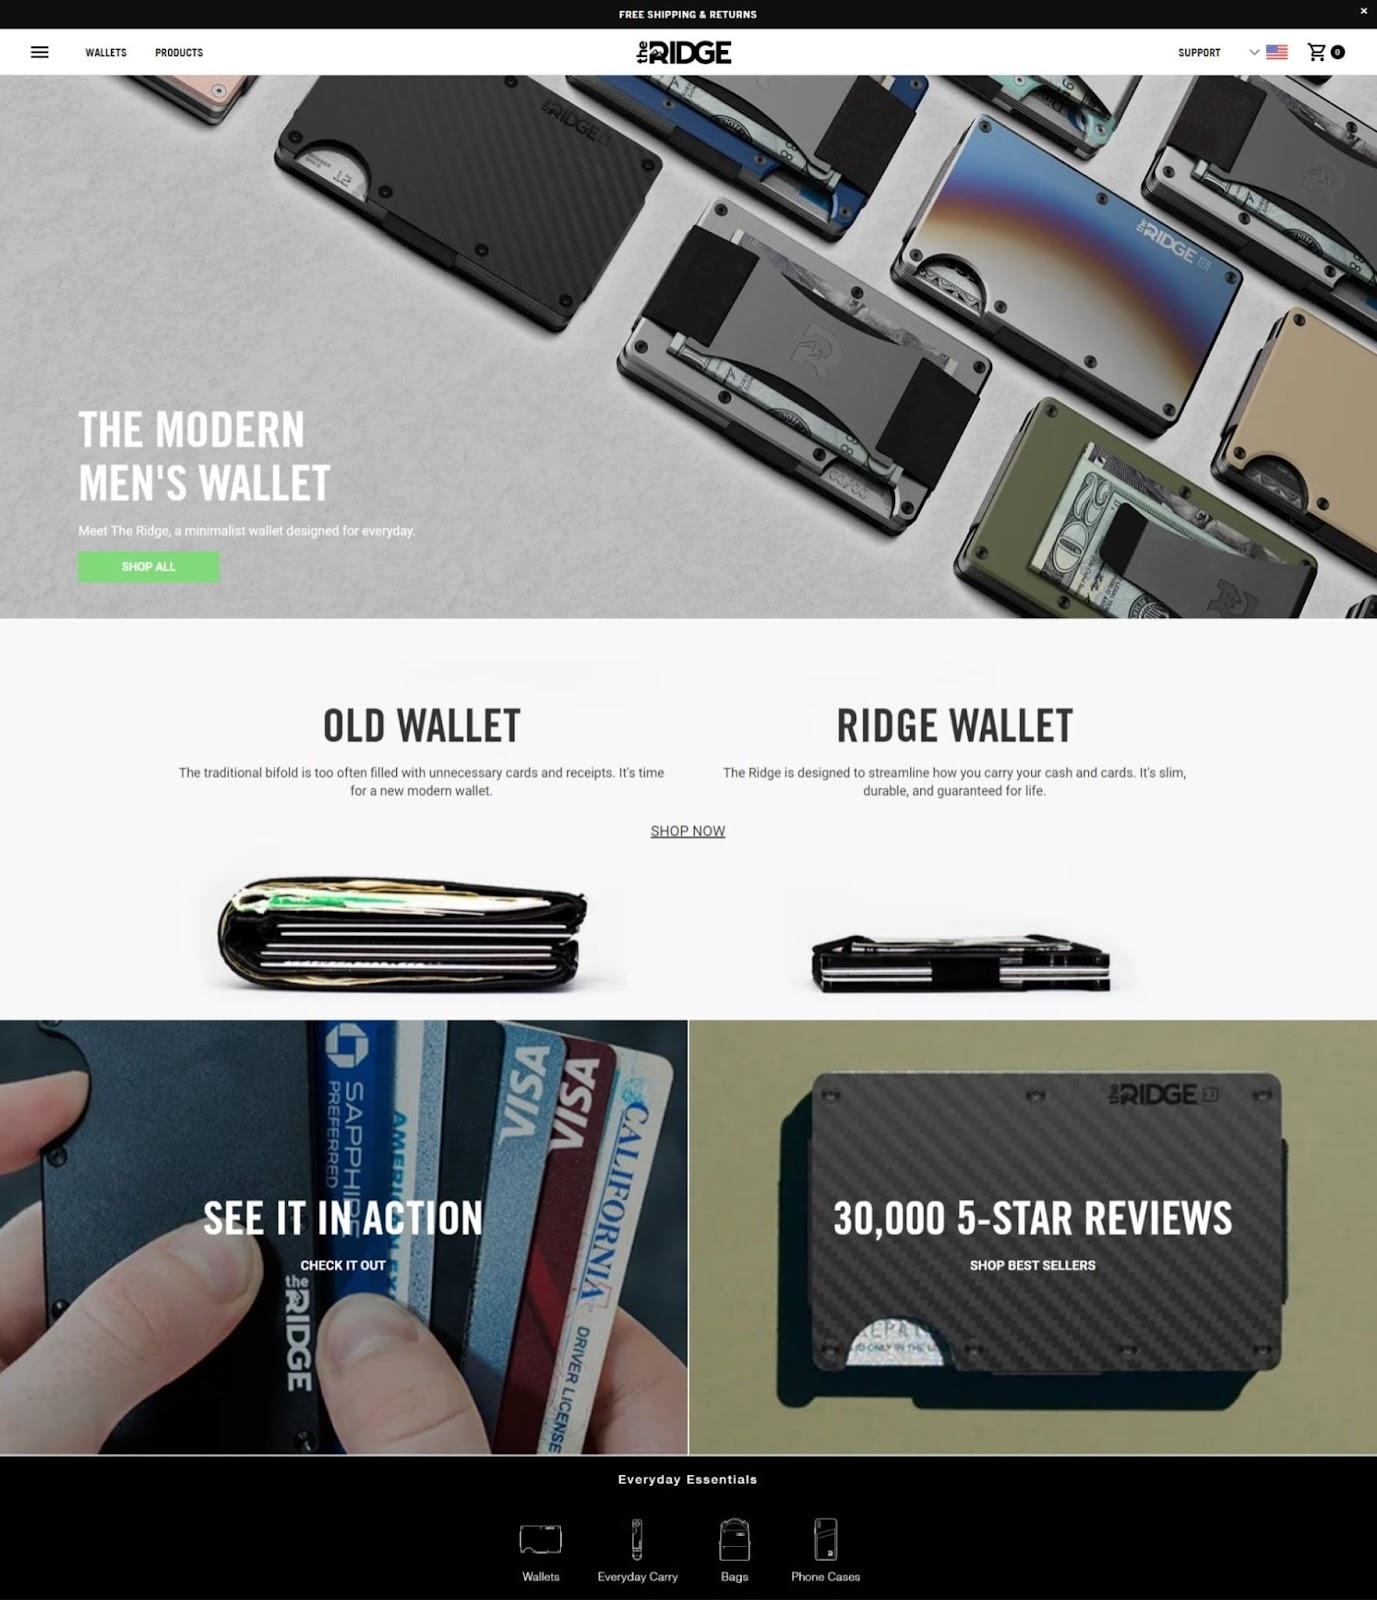 product landing page the ridge wallet comparison with regular wallets